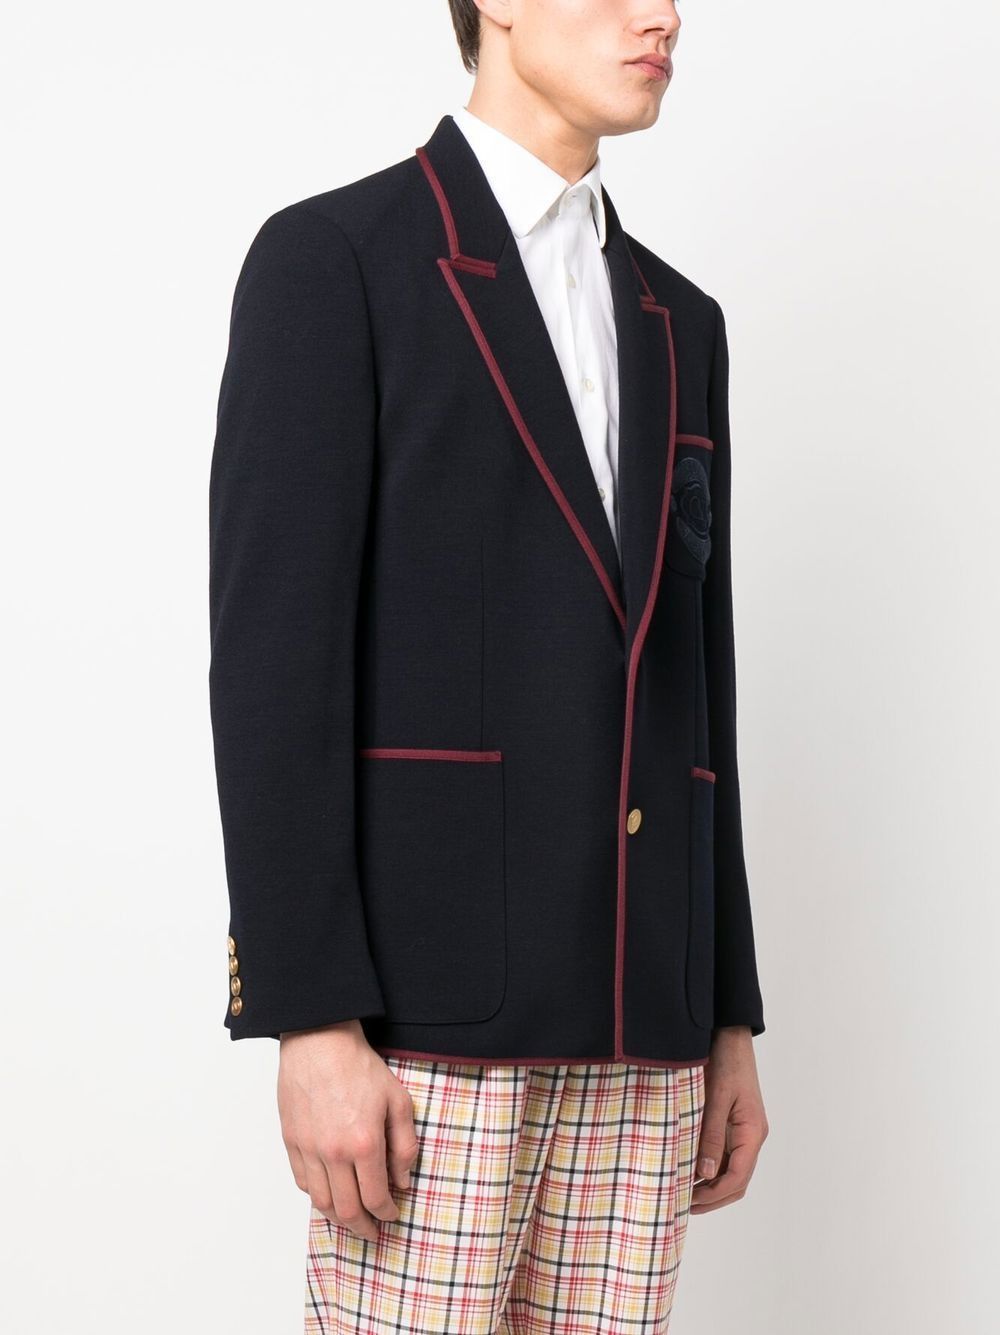 VALENTINO Navy Blue Semi-Lined Jacket for Men - SS23 Collection